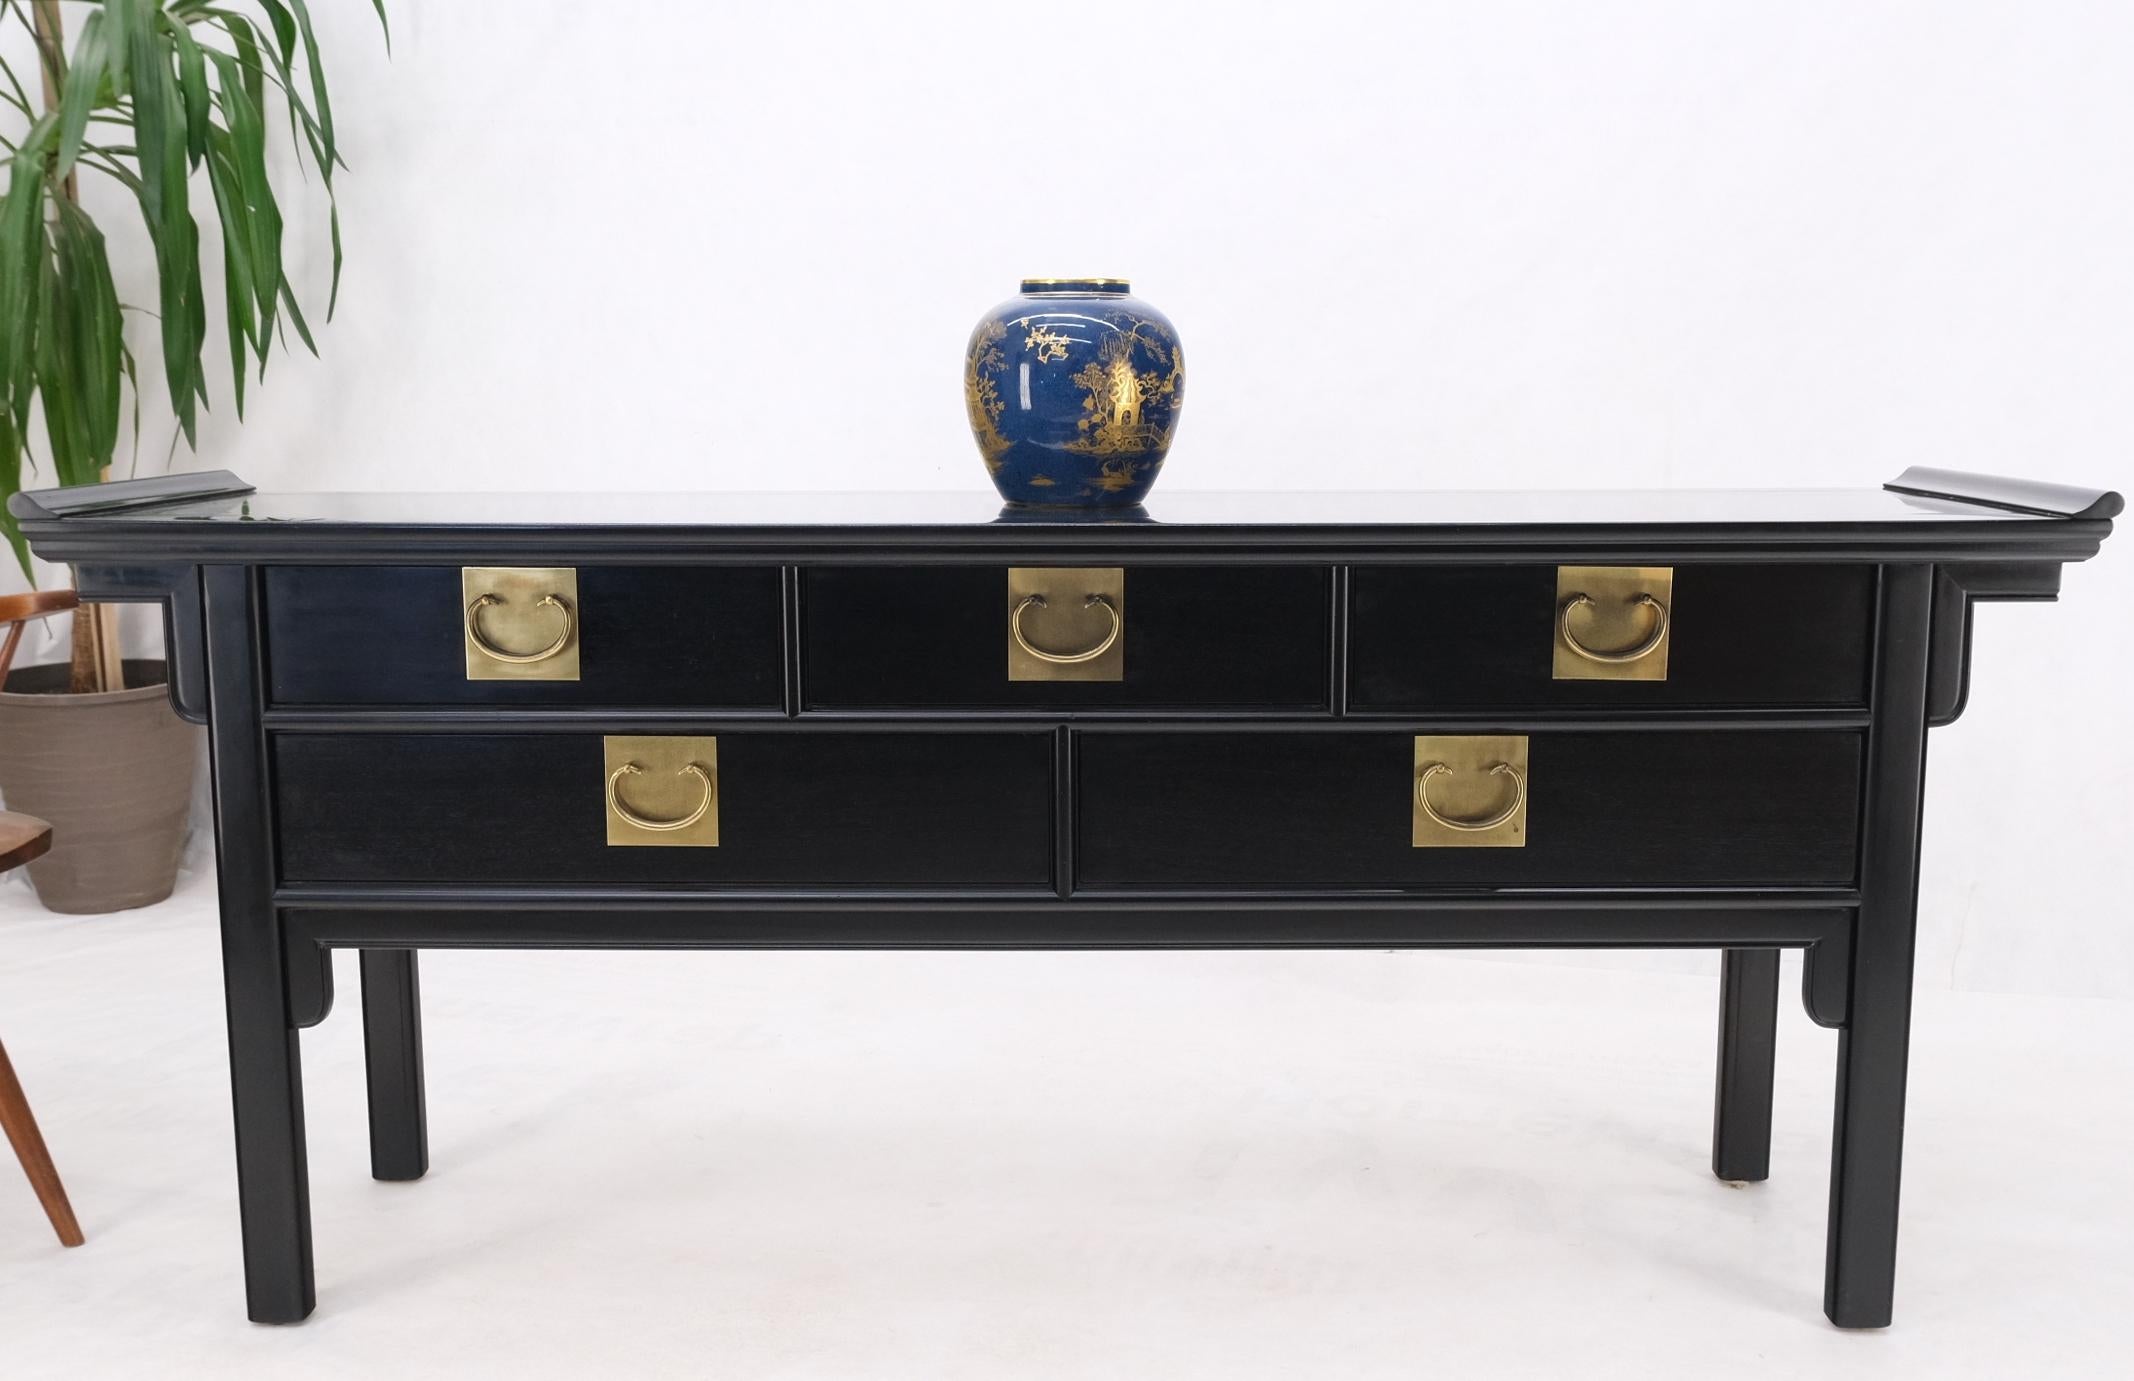 Black Lacquer Brass Hardware 5 Drawers Oriental Long Credenza Console Table Mint 11